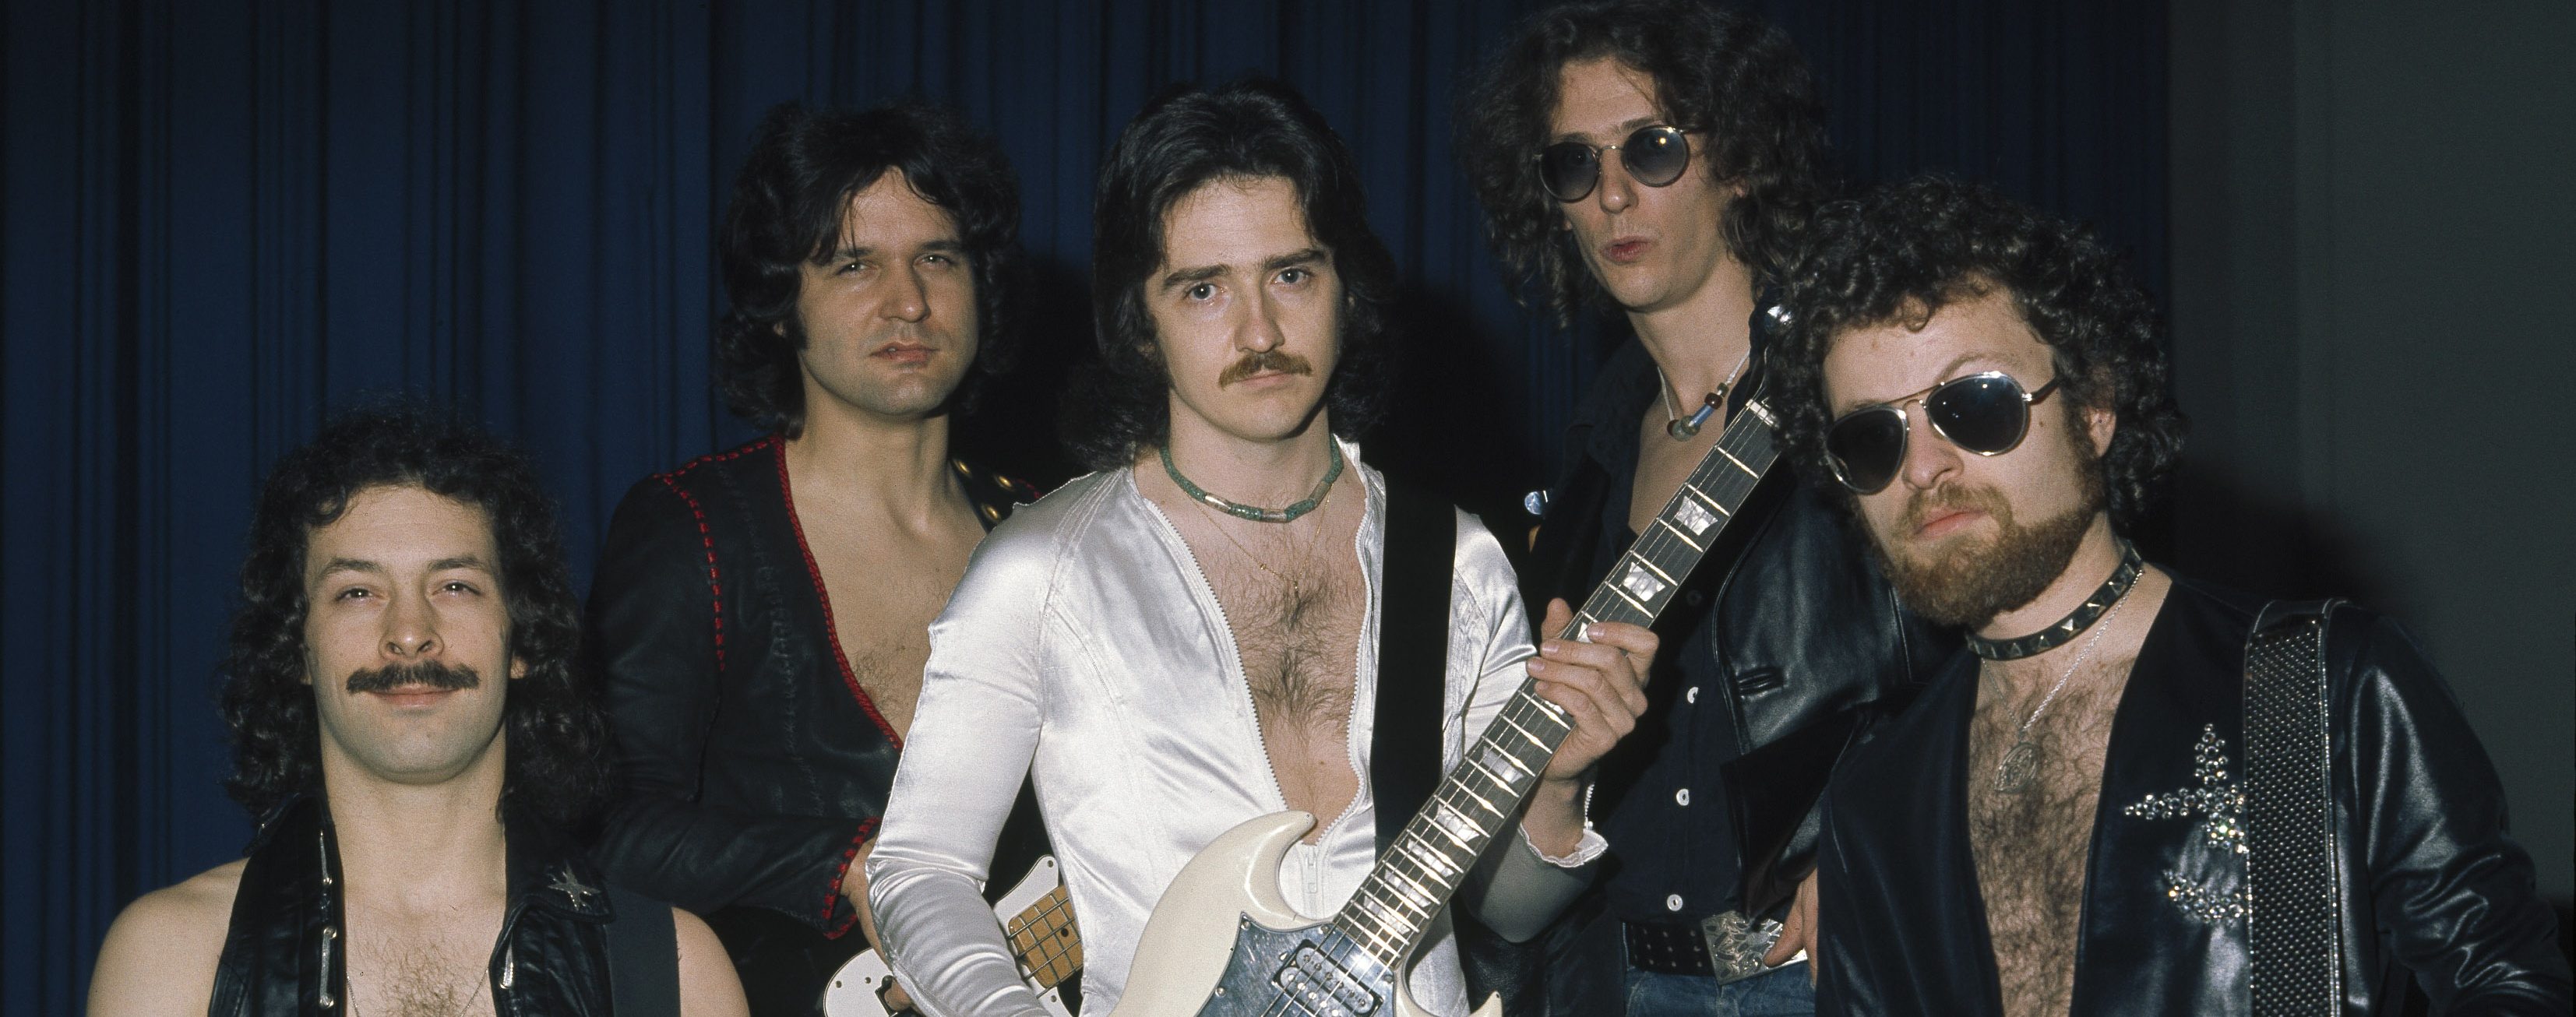 Before Blue Öyster Cult Lost Their Way, They Led Greasers to Paradise